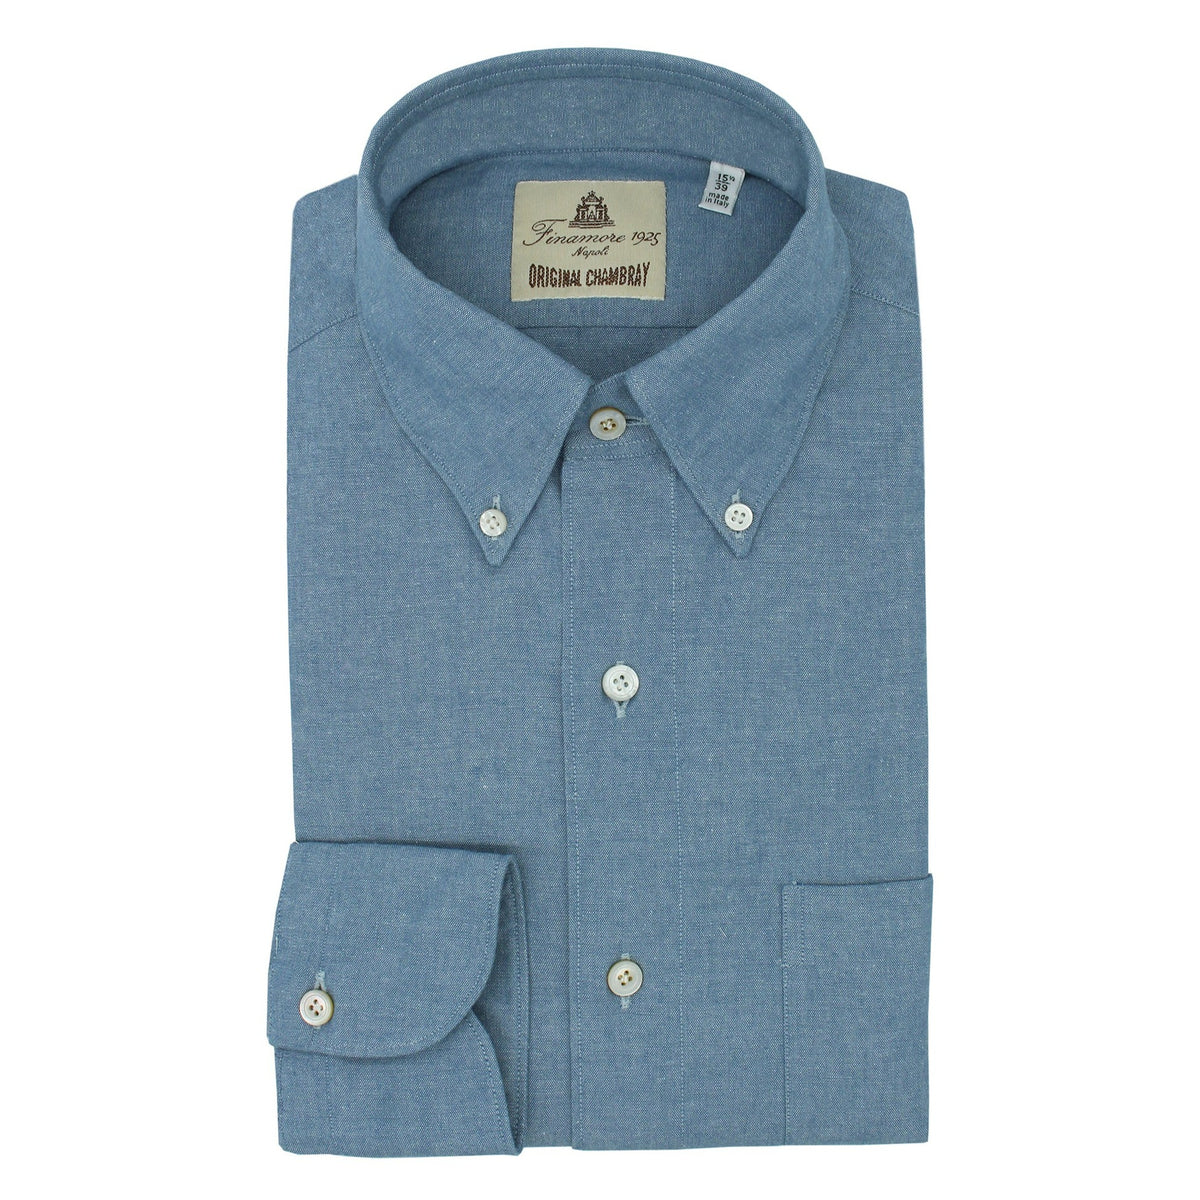 Shirt slim fit Tokyo in Chambray blue cotton button down with pocket